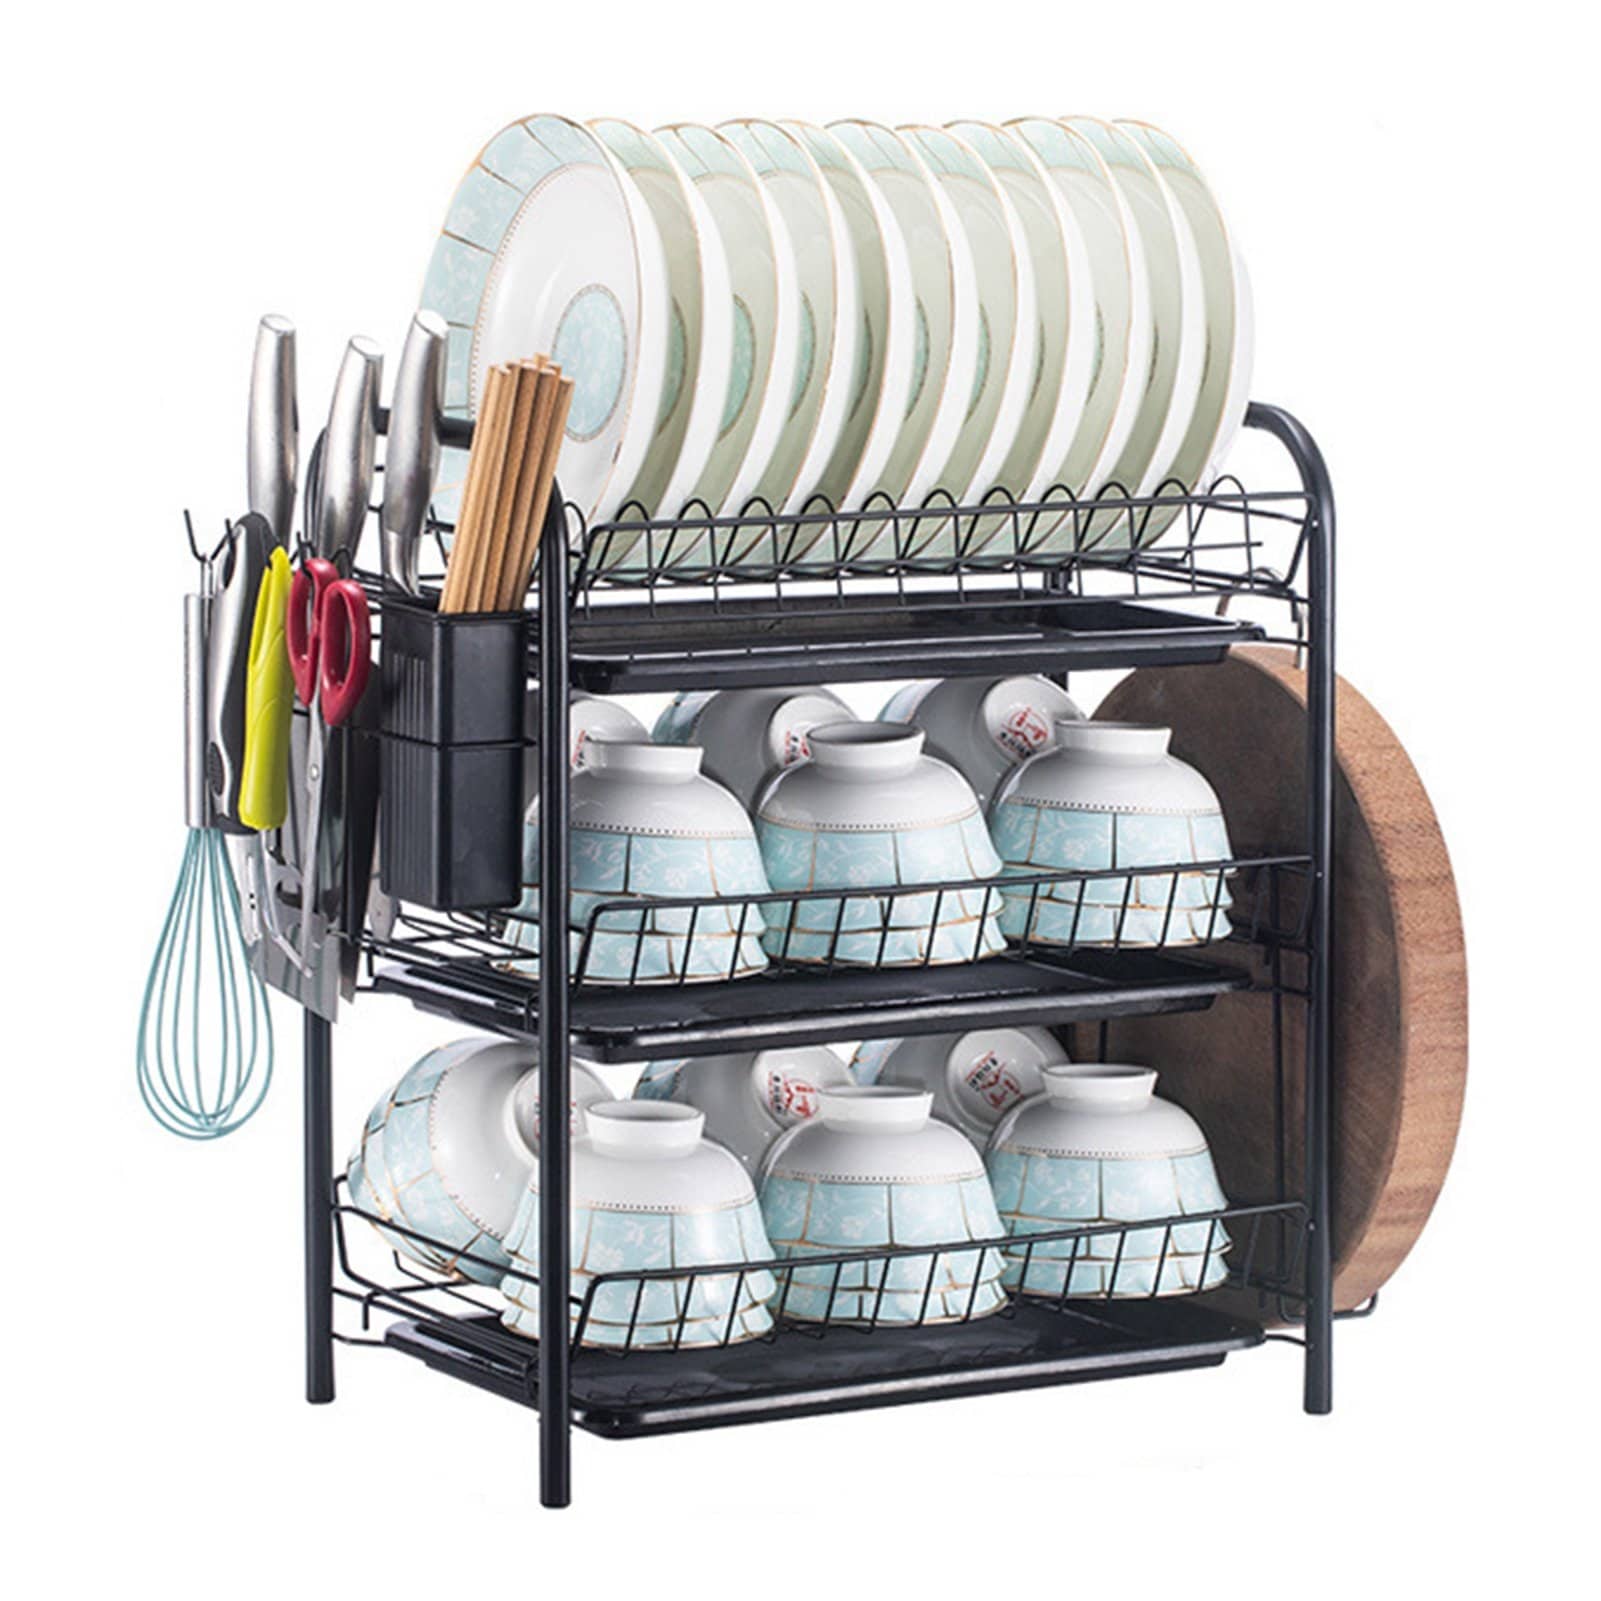 https://ak1.ostkcdn.com/images/products/is/images/direct/a43c9c988f95afa658c9870ec4eff5be49081d66/2-Tier-Large-Capacity-Dish-Rack-with-Tray%2C-Cutting-Board-Holder.jpg